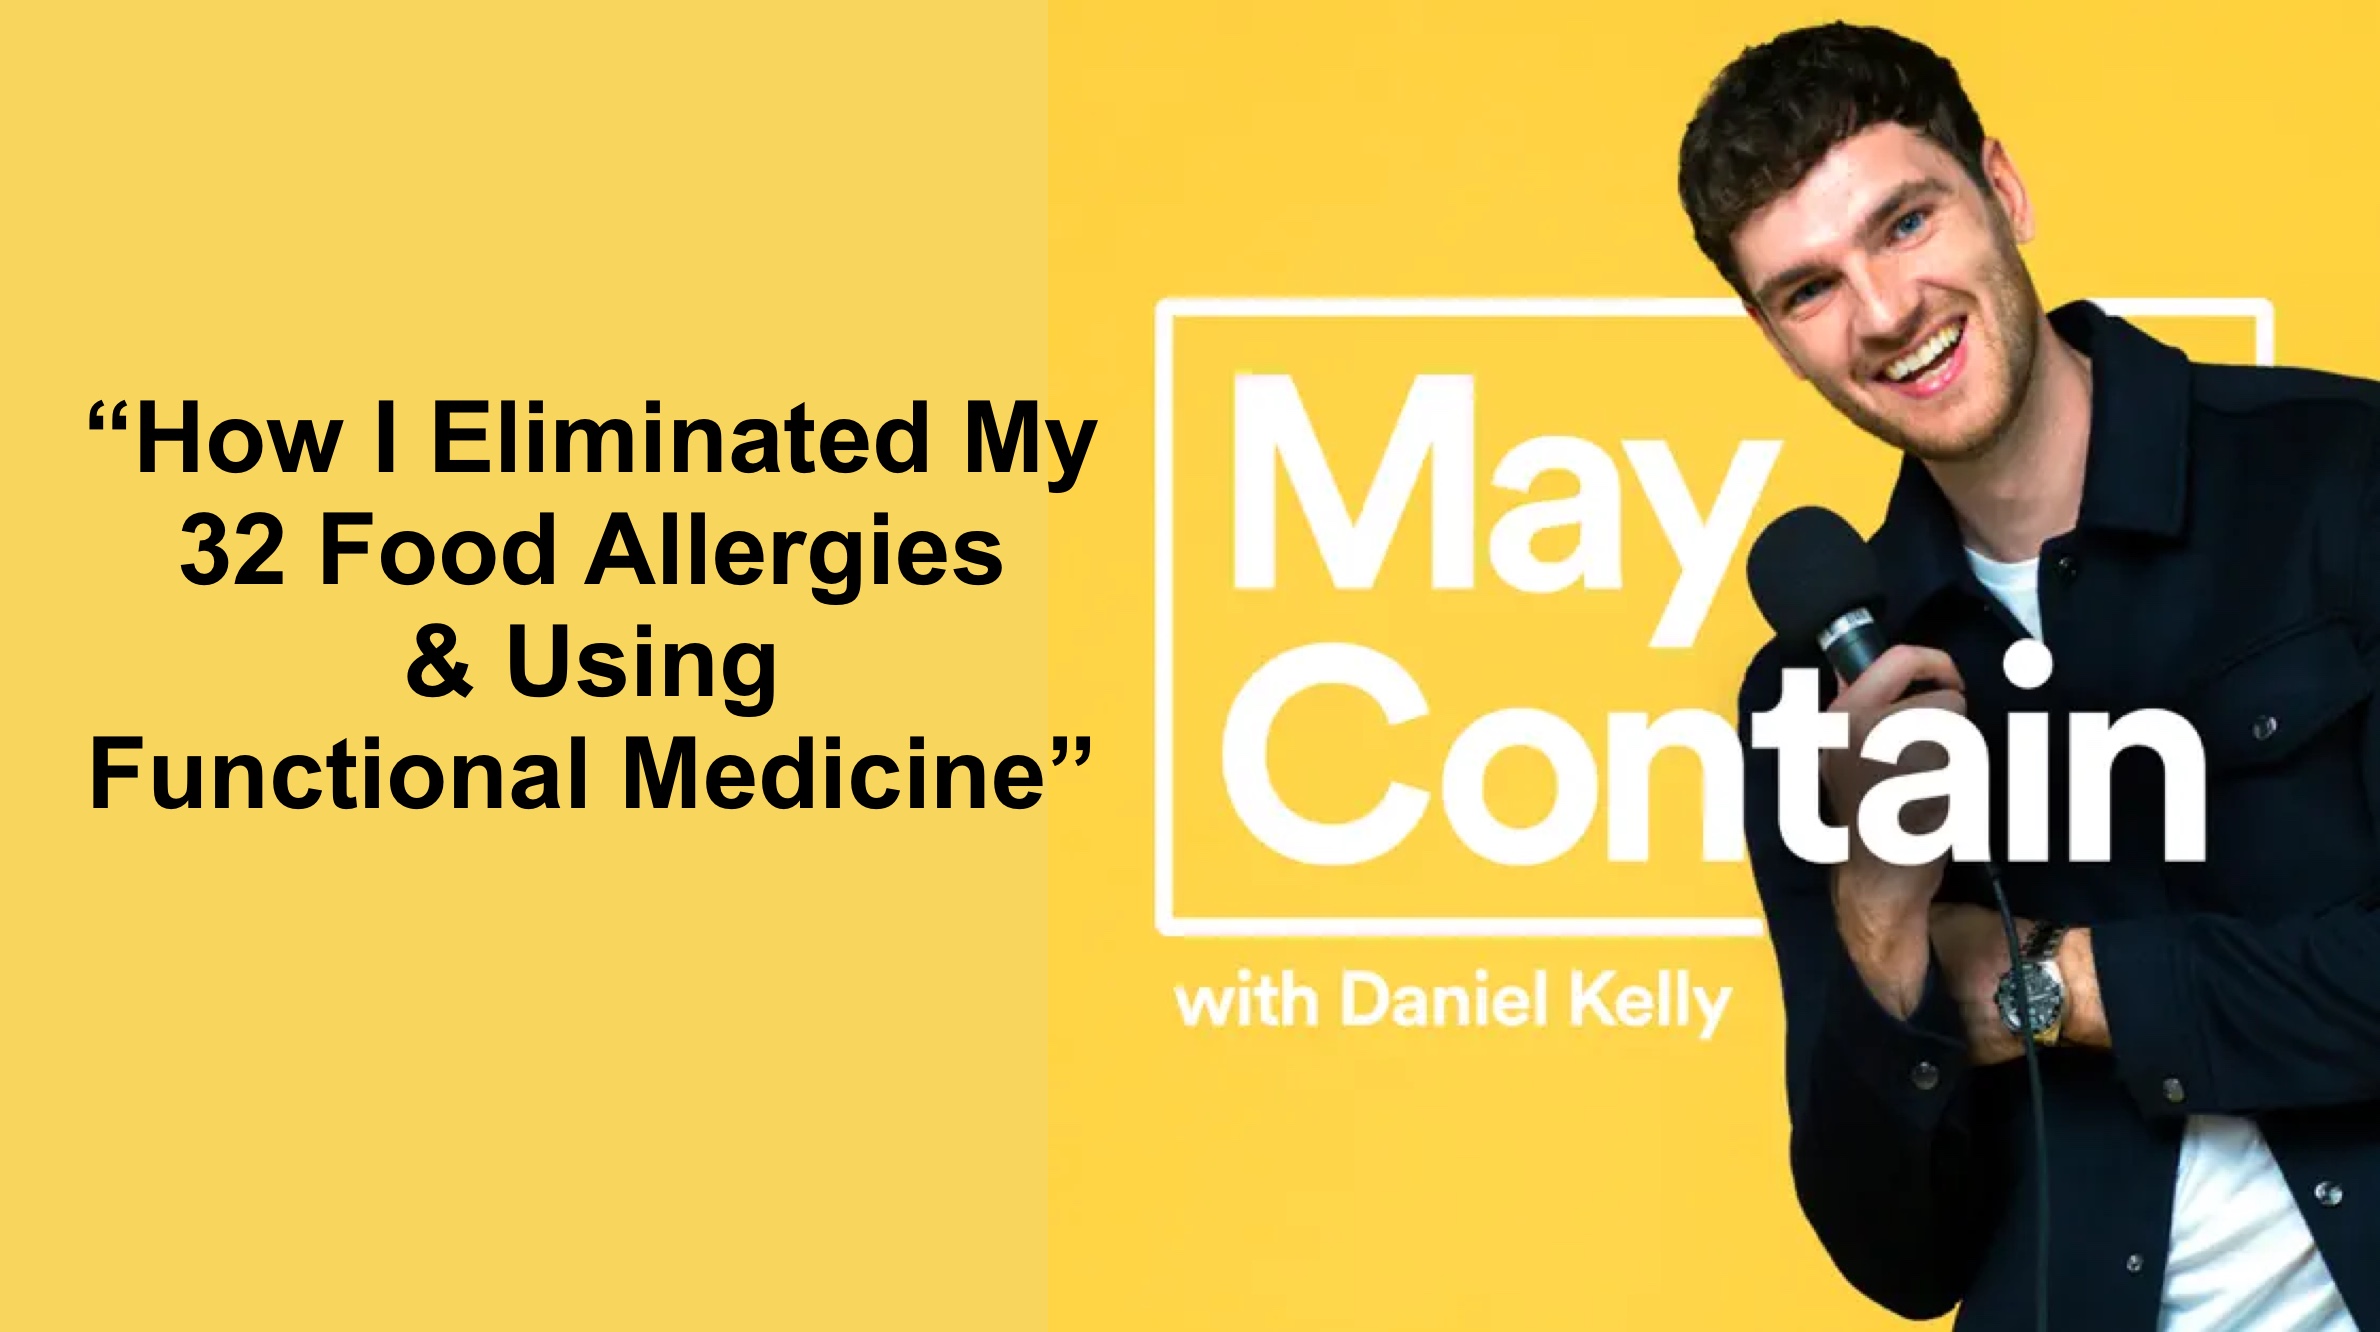 May Contain podcast with Daniel Kelly - Guest, Sonia Hunt